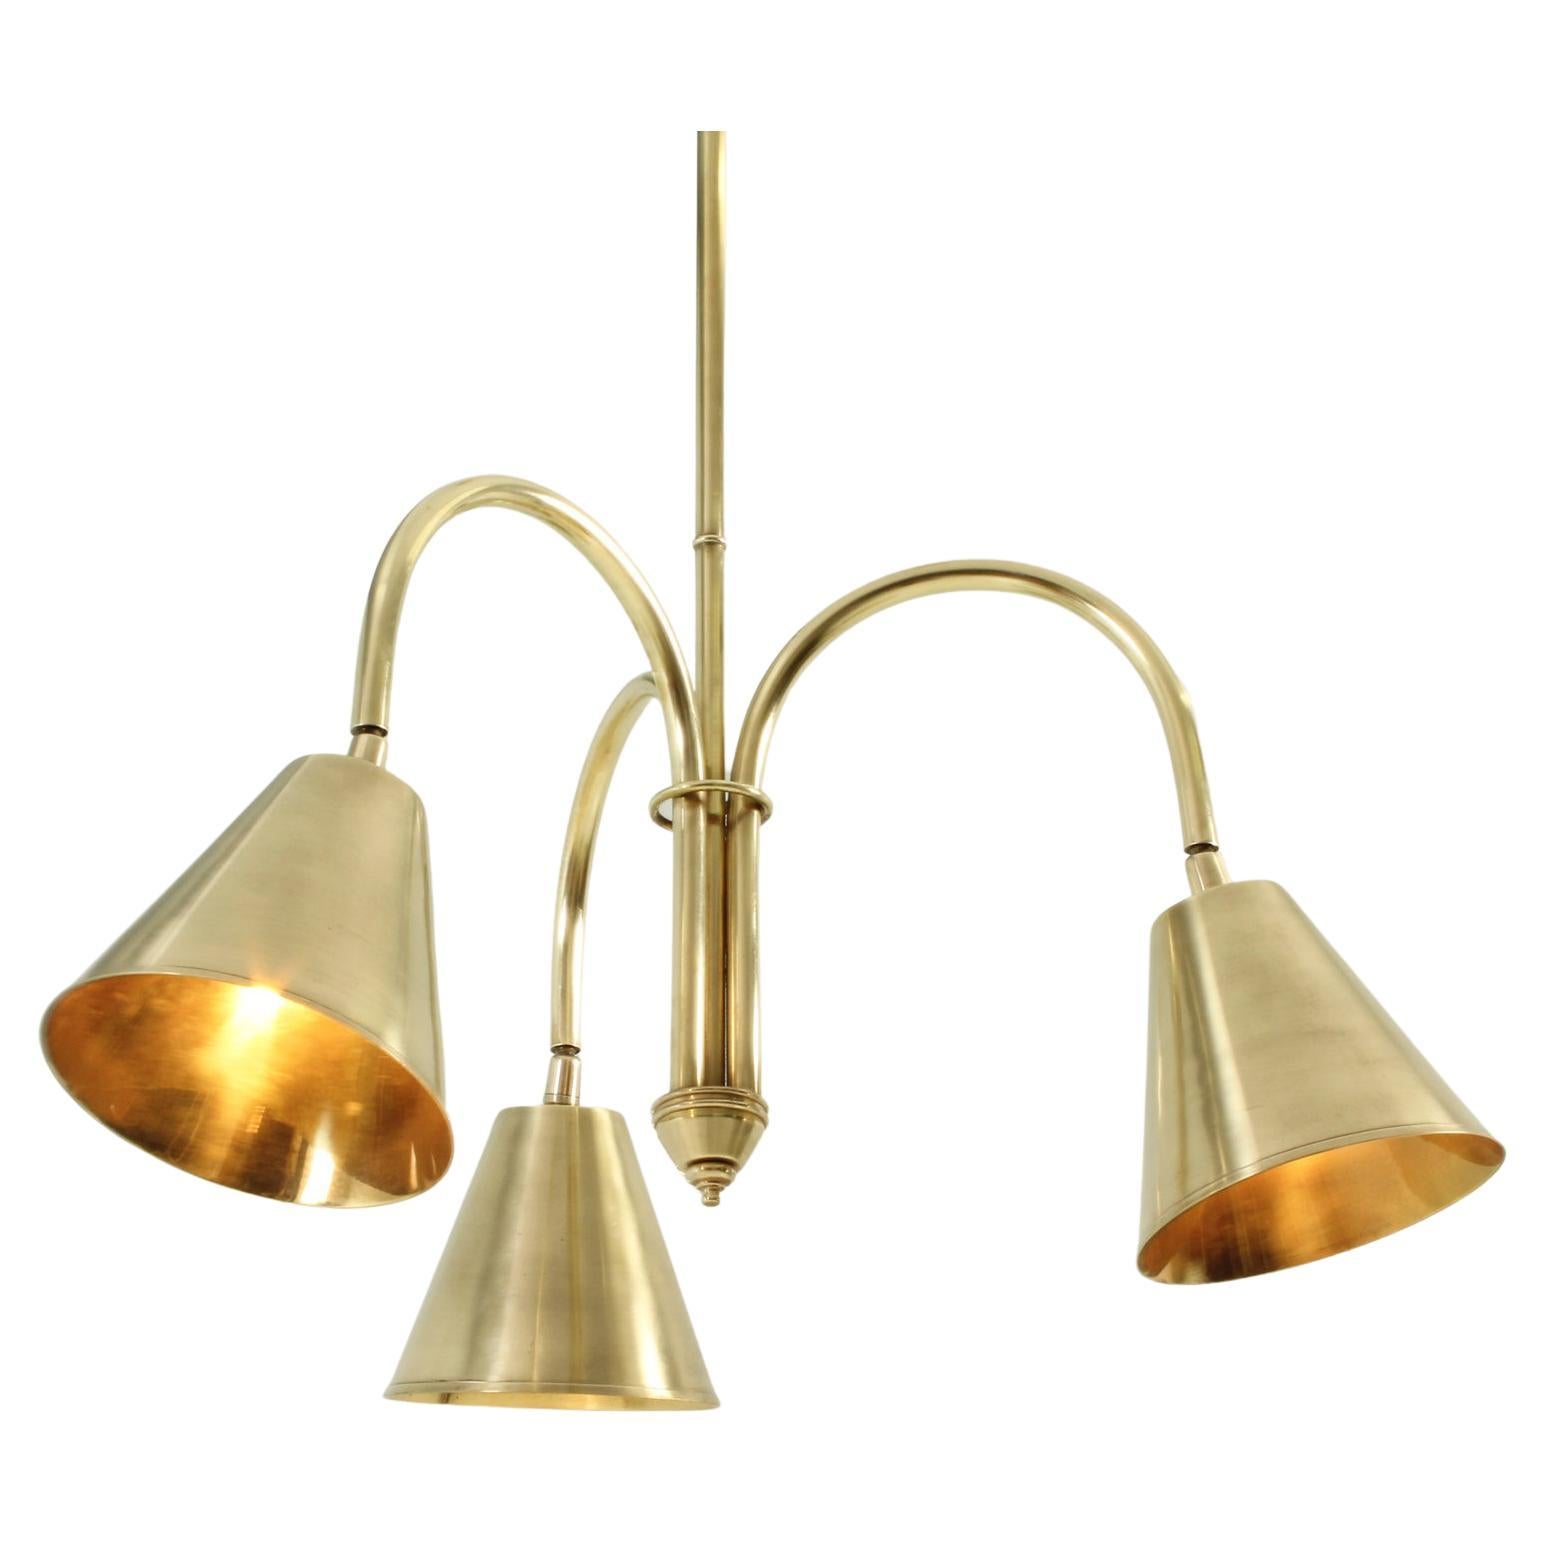 Brass Ceiling Lamp by Valenti, Spain 1950's For Sale